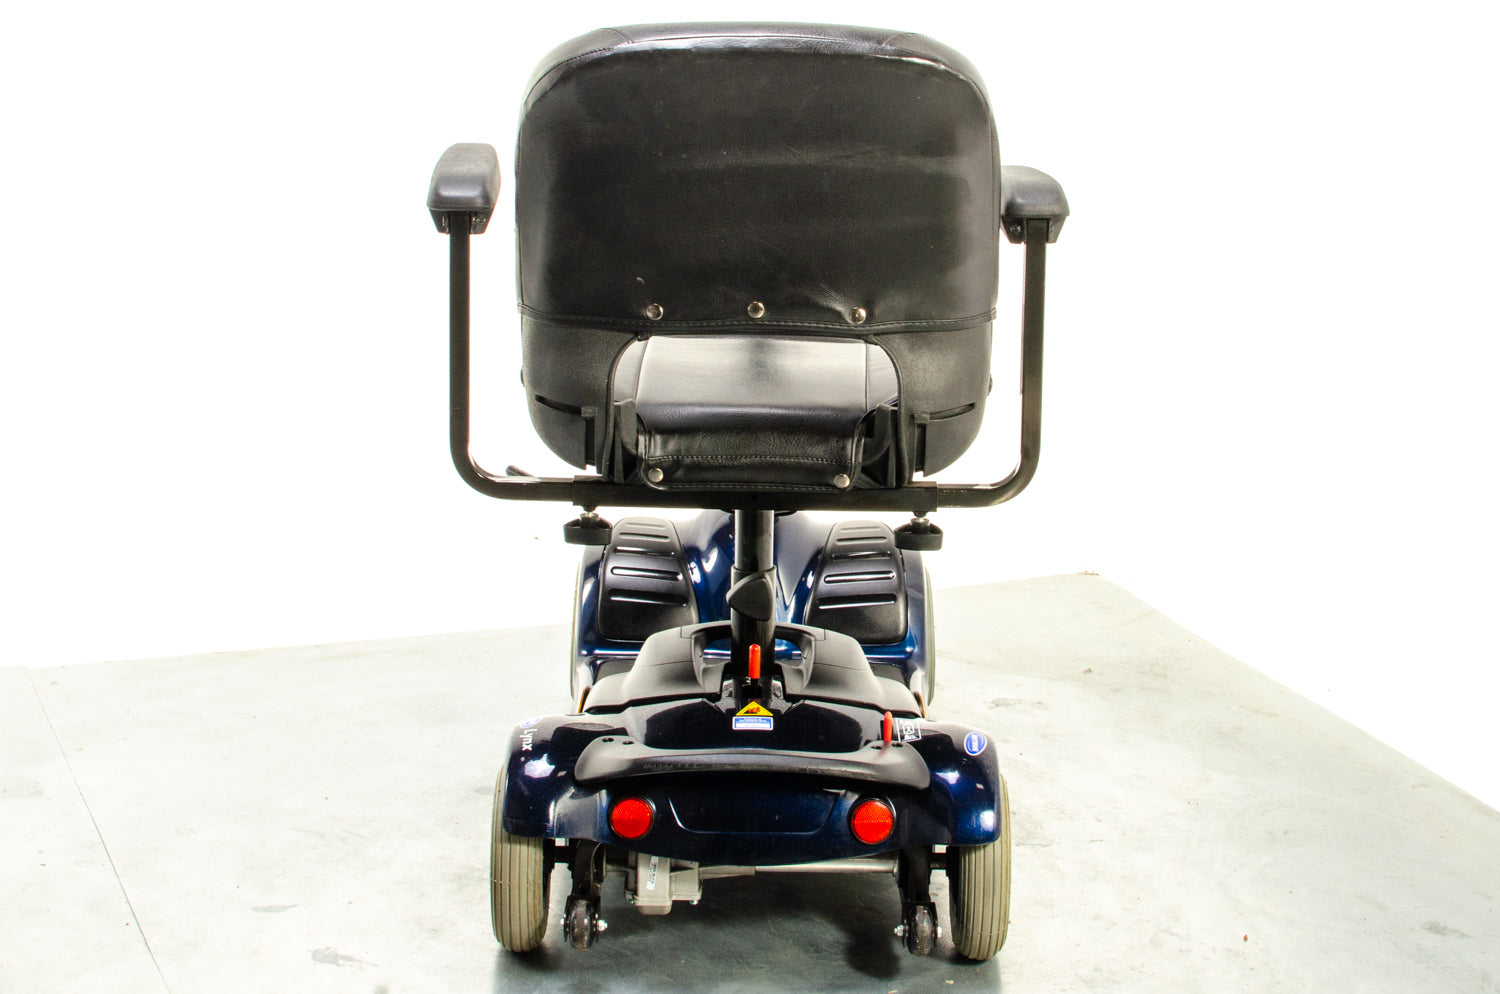 Invacare Lynx Used Mobility Scooter Small Boot Transportable Lightweight Travel Indoor Blue